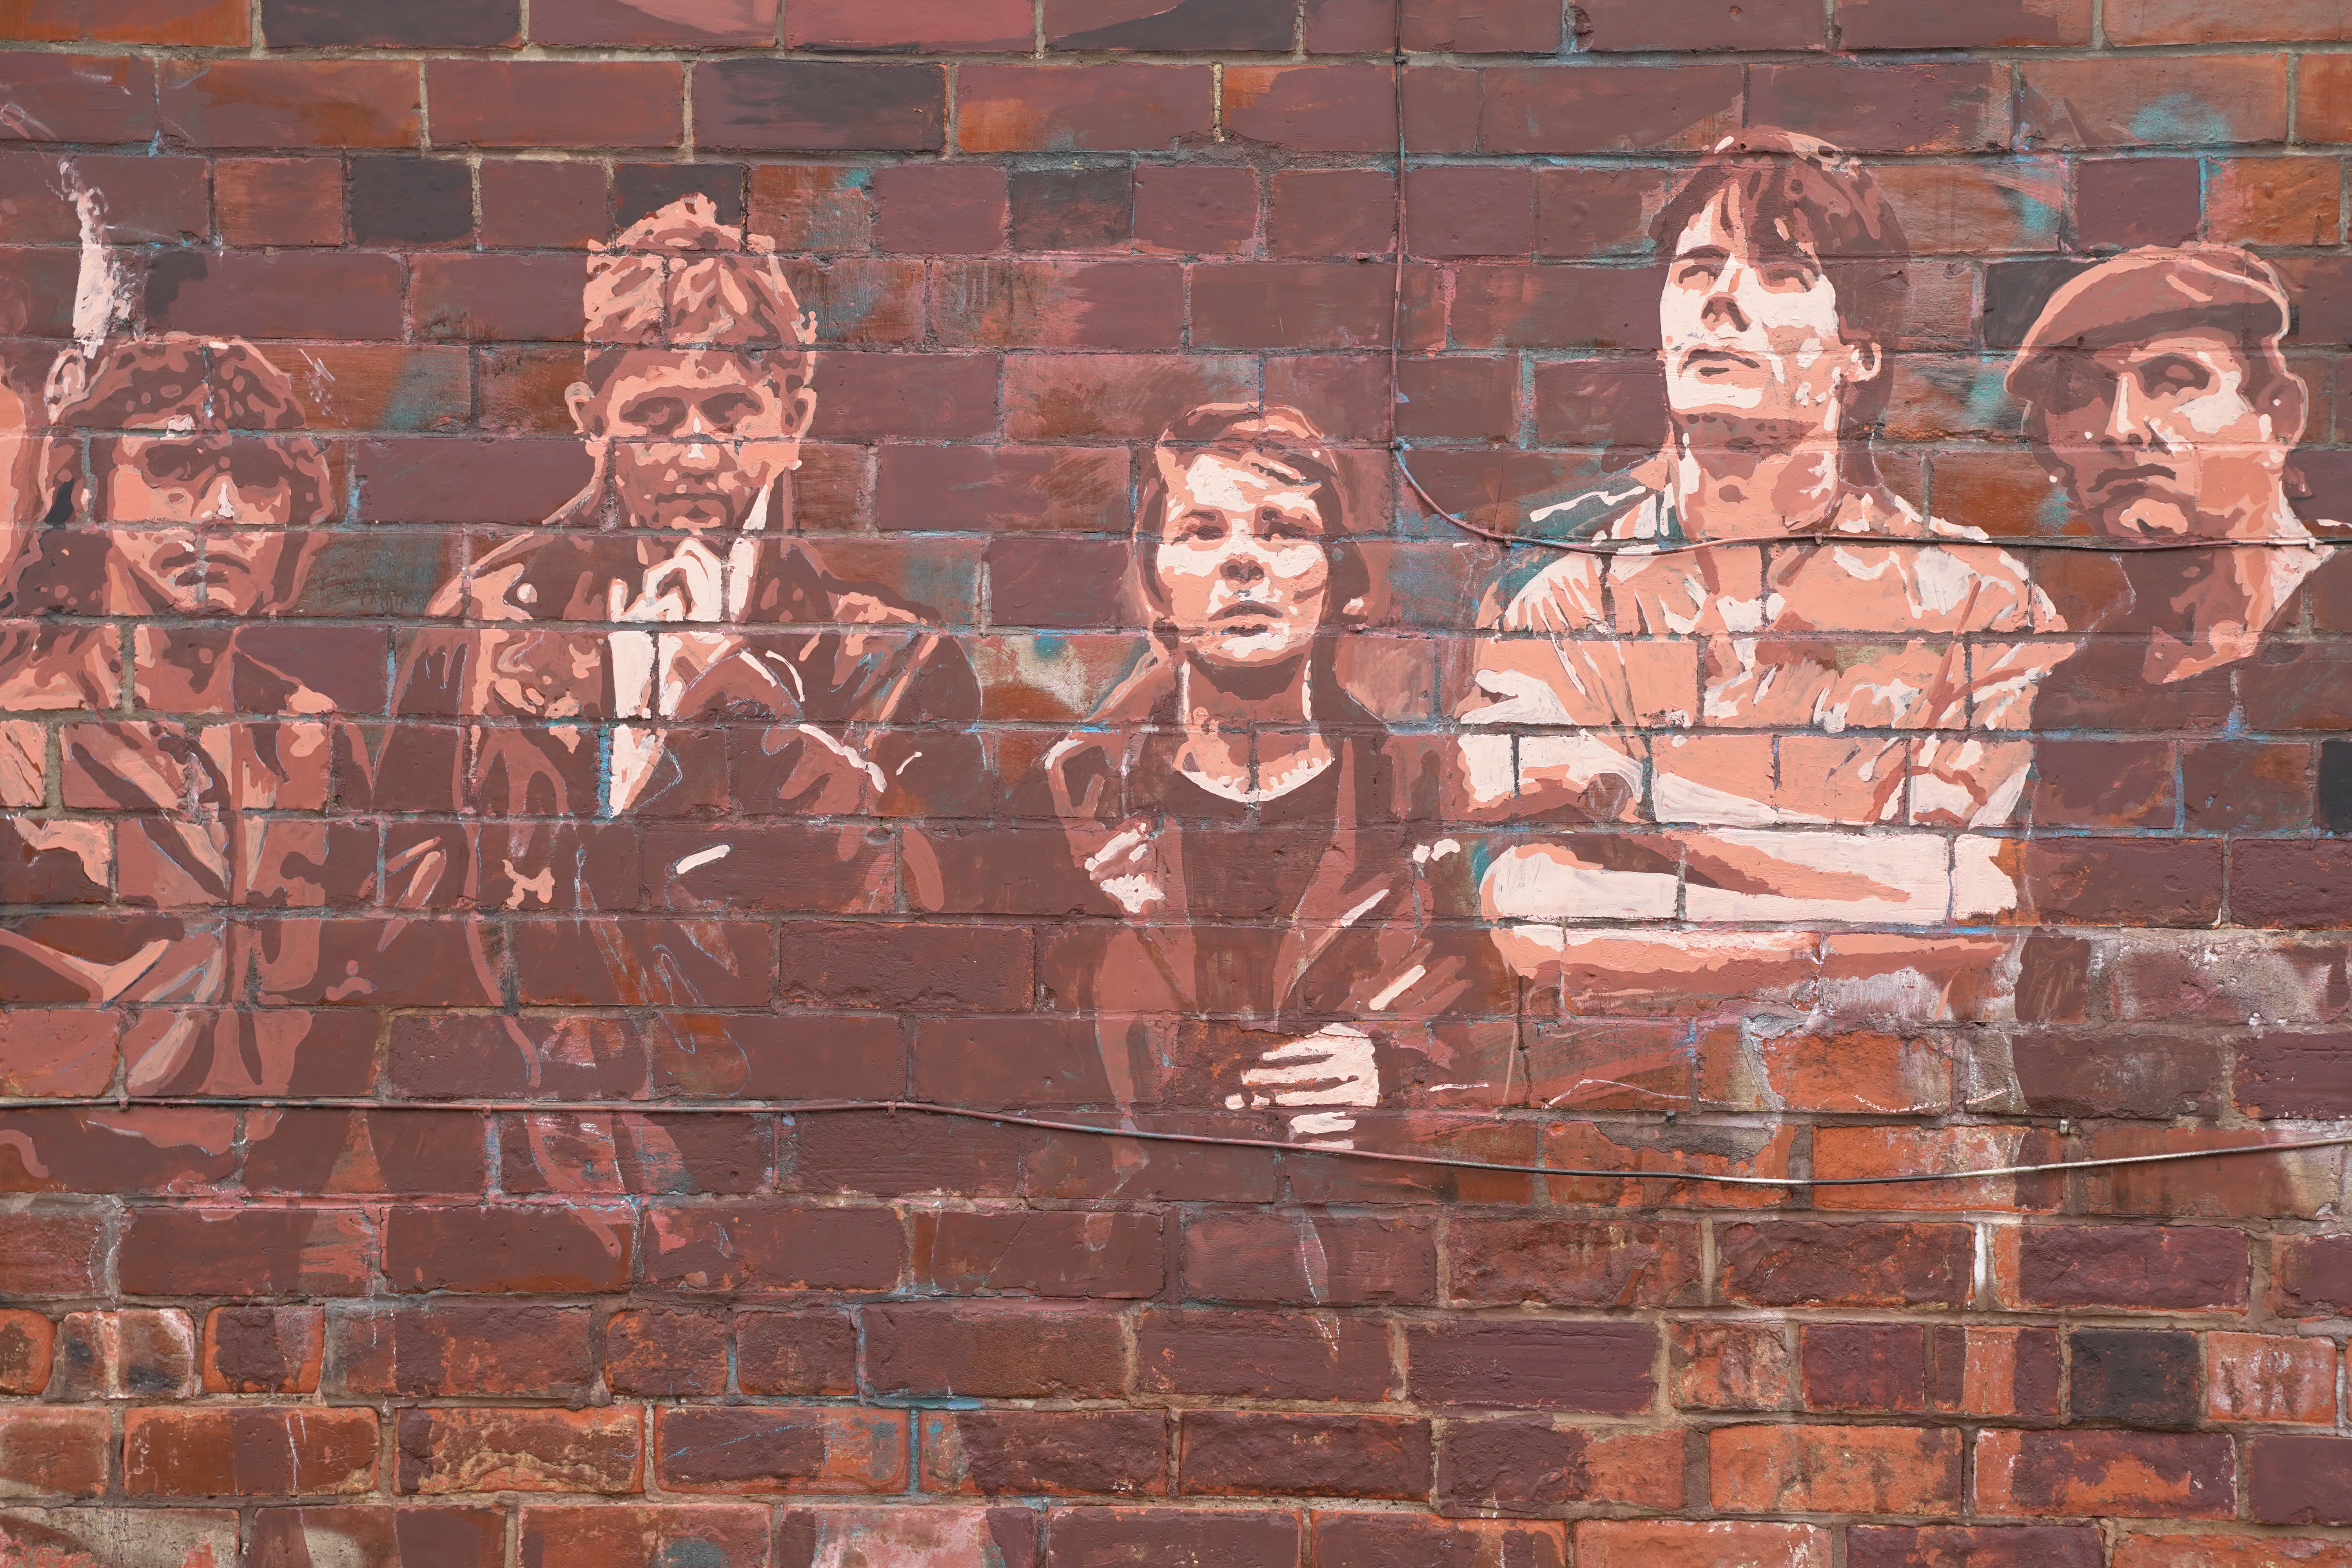 Mural, Clumber Street, Hull. Photo by Doug Swallow.